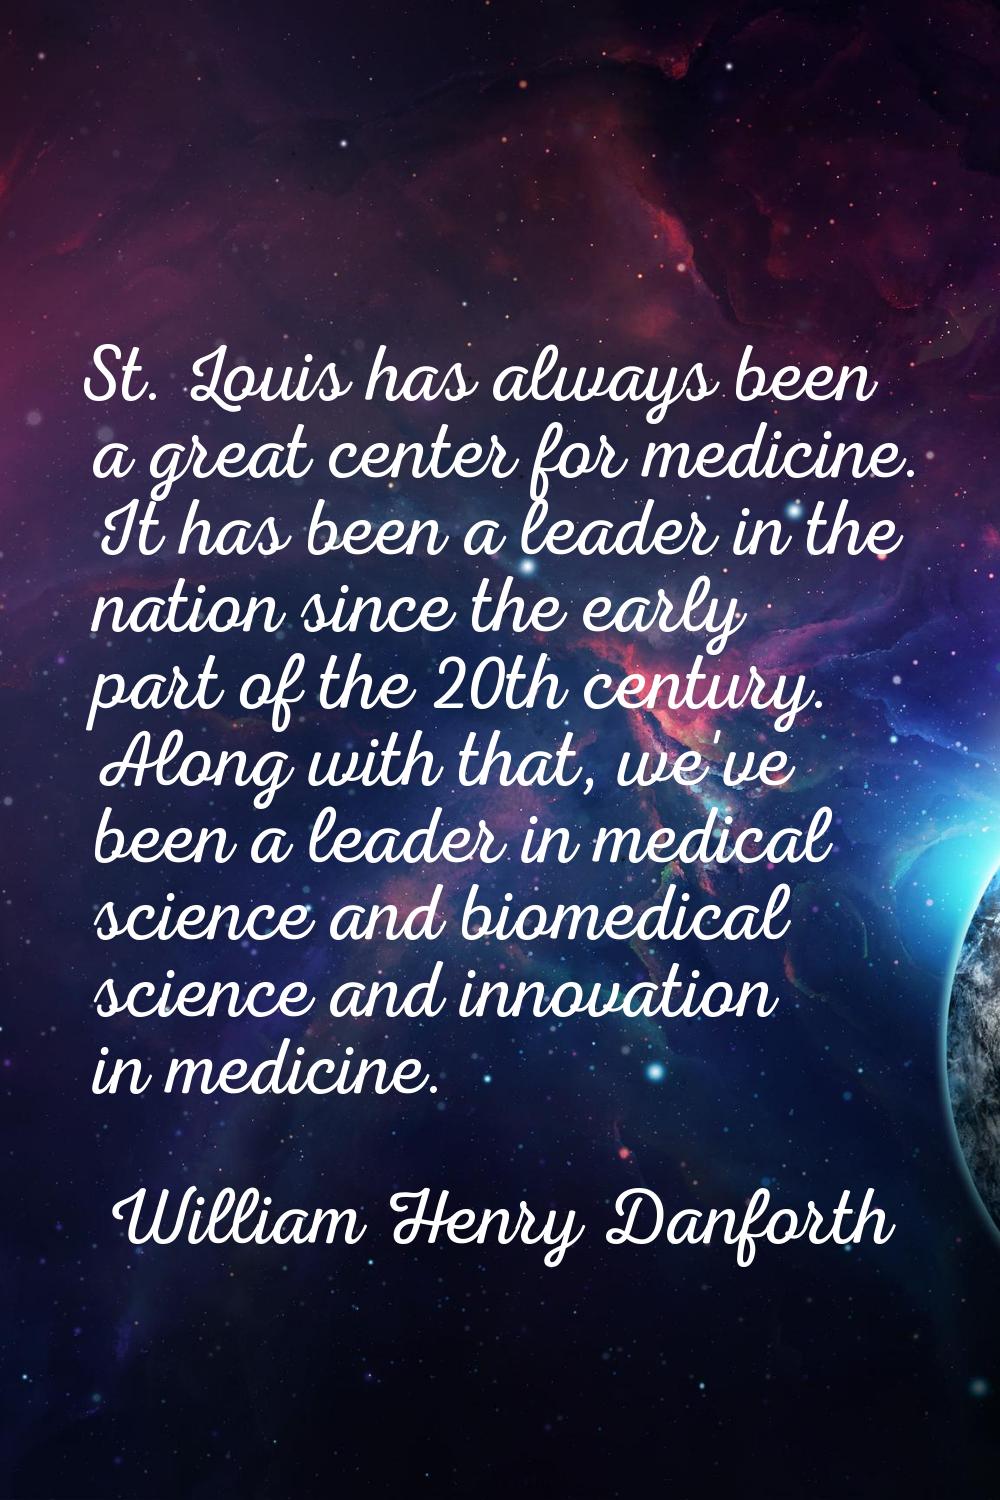 St. Louis has always been a great center for medicine. It has been a leader in the nation since the